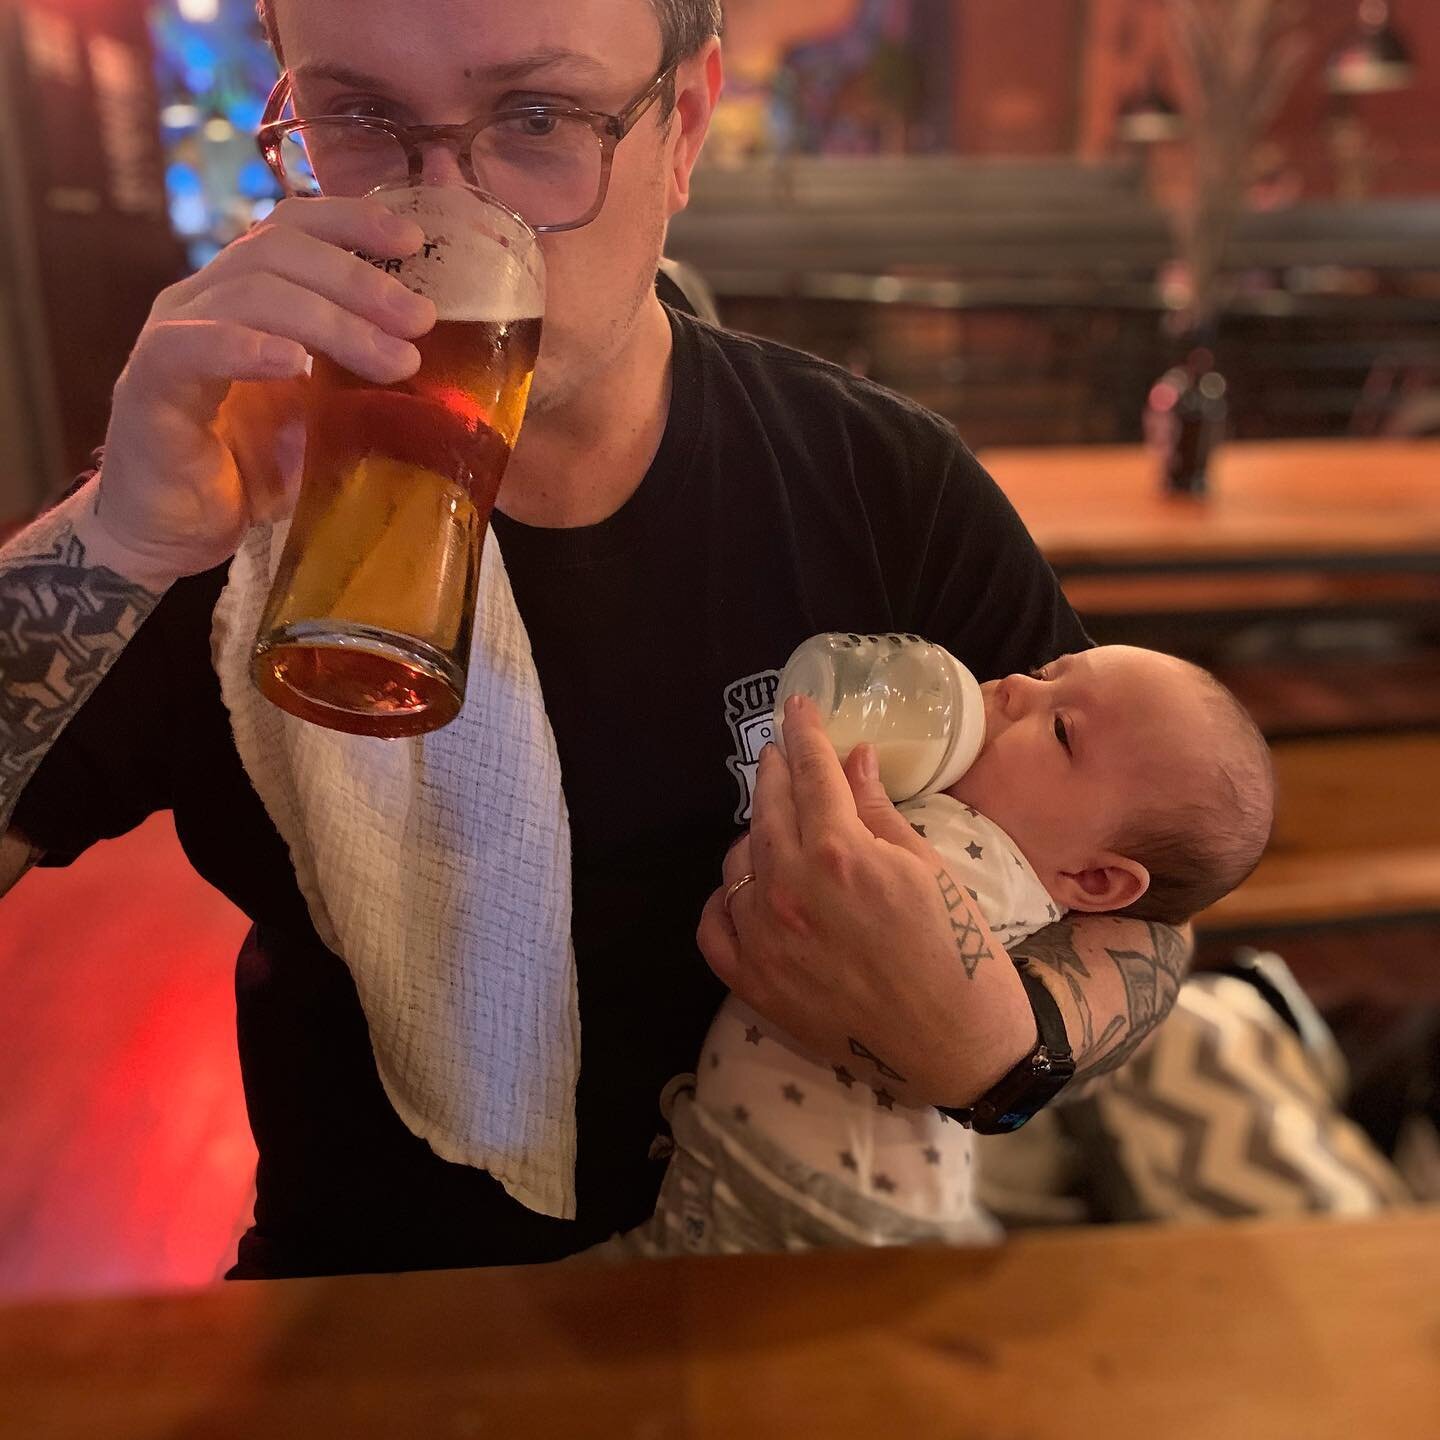 We all know it&rsquo;s just a date made up in 1582 by a bloke named Greg (or something like that), but 2020 has been shitty as hell for pretty much everyone (apart from Bezos). @emma_bnx and I were lucky enough to welcome Milo into the world, becomin